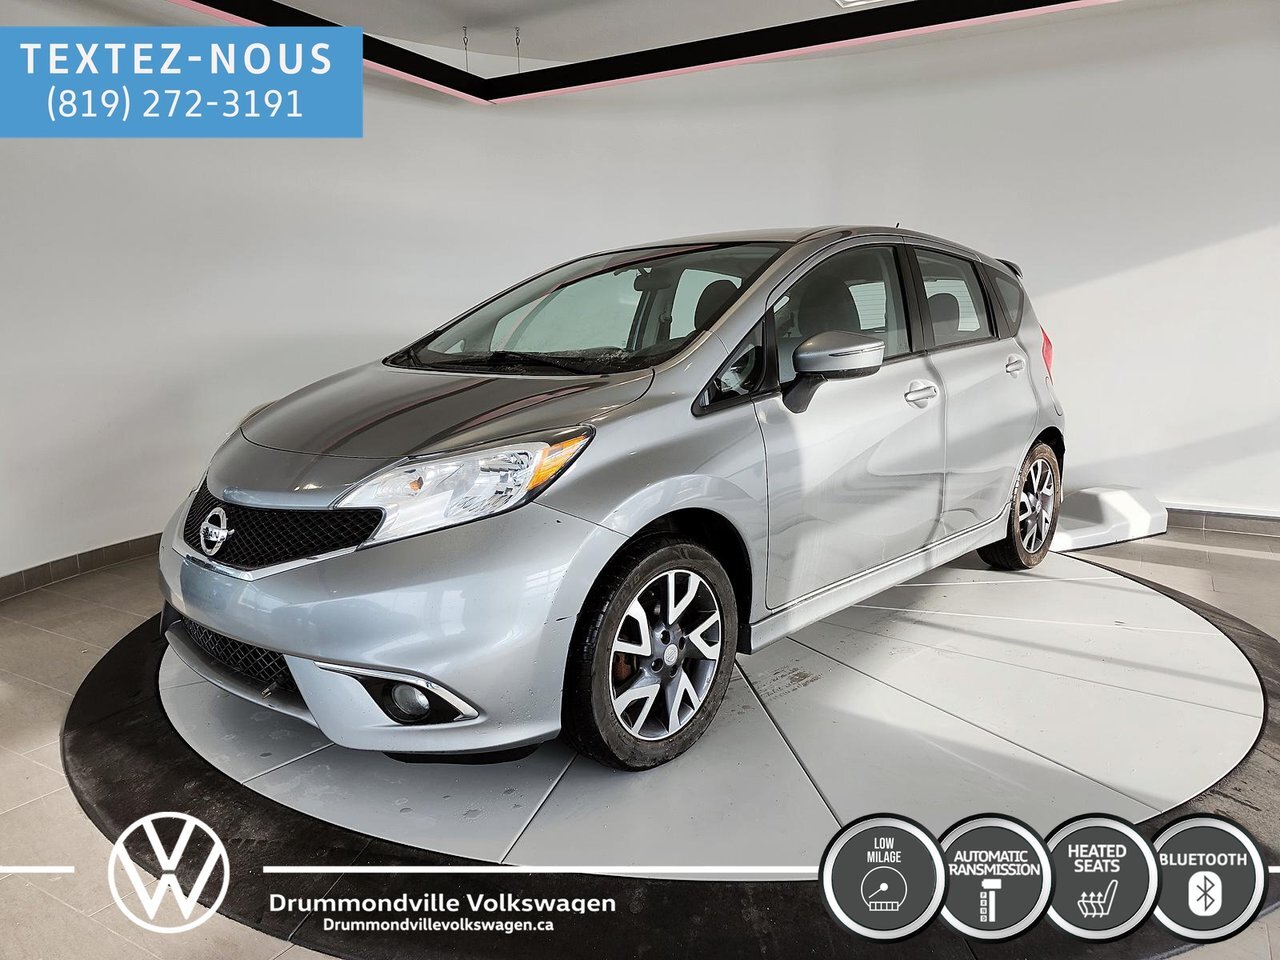 2015 Nissan Versa Note SR + BLUETOOTH + CLIMATISATION  +++ CONTACT US AT 